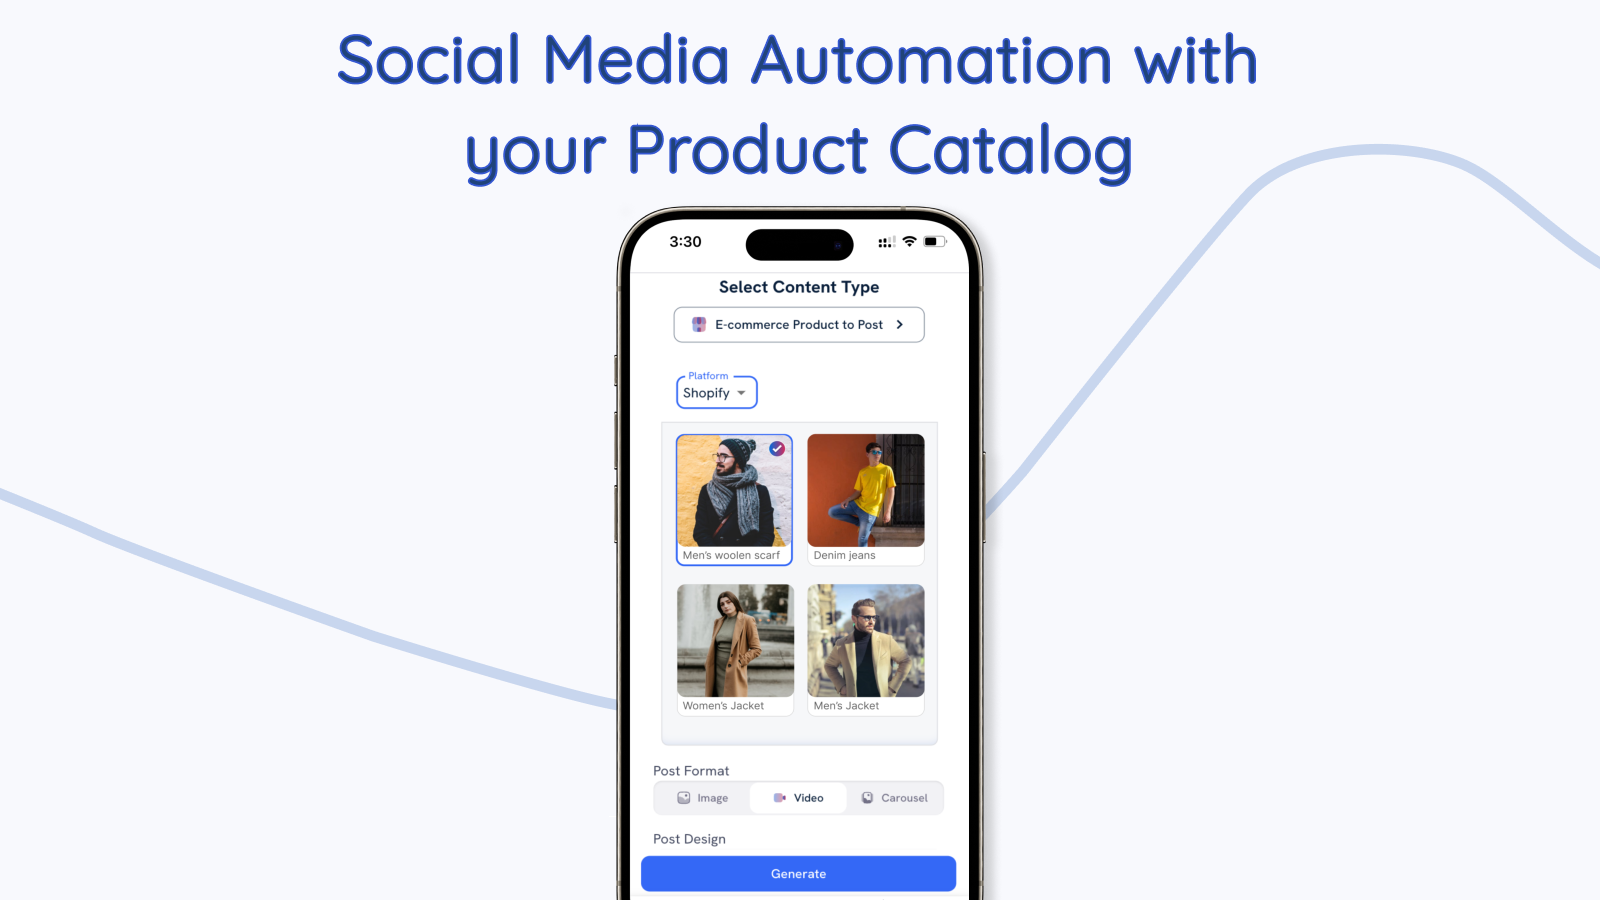 Social Media Automation based on Your Product Catalog